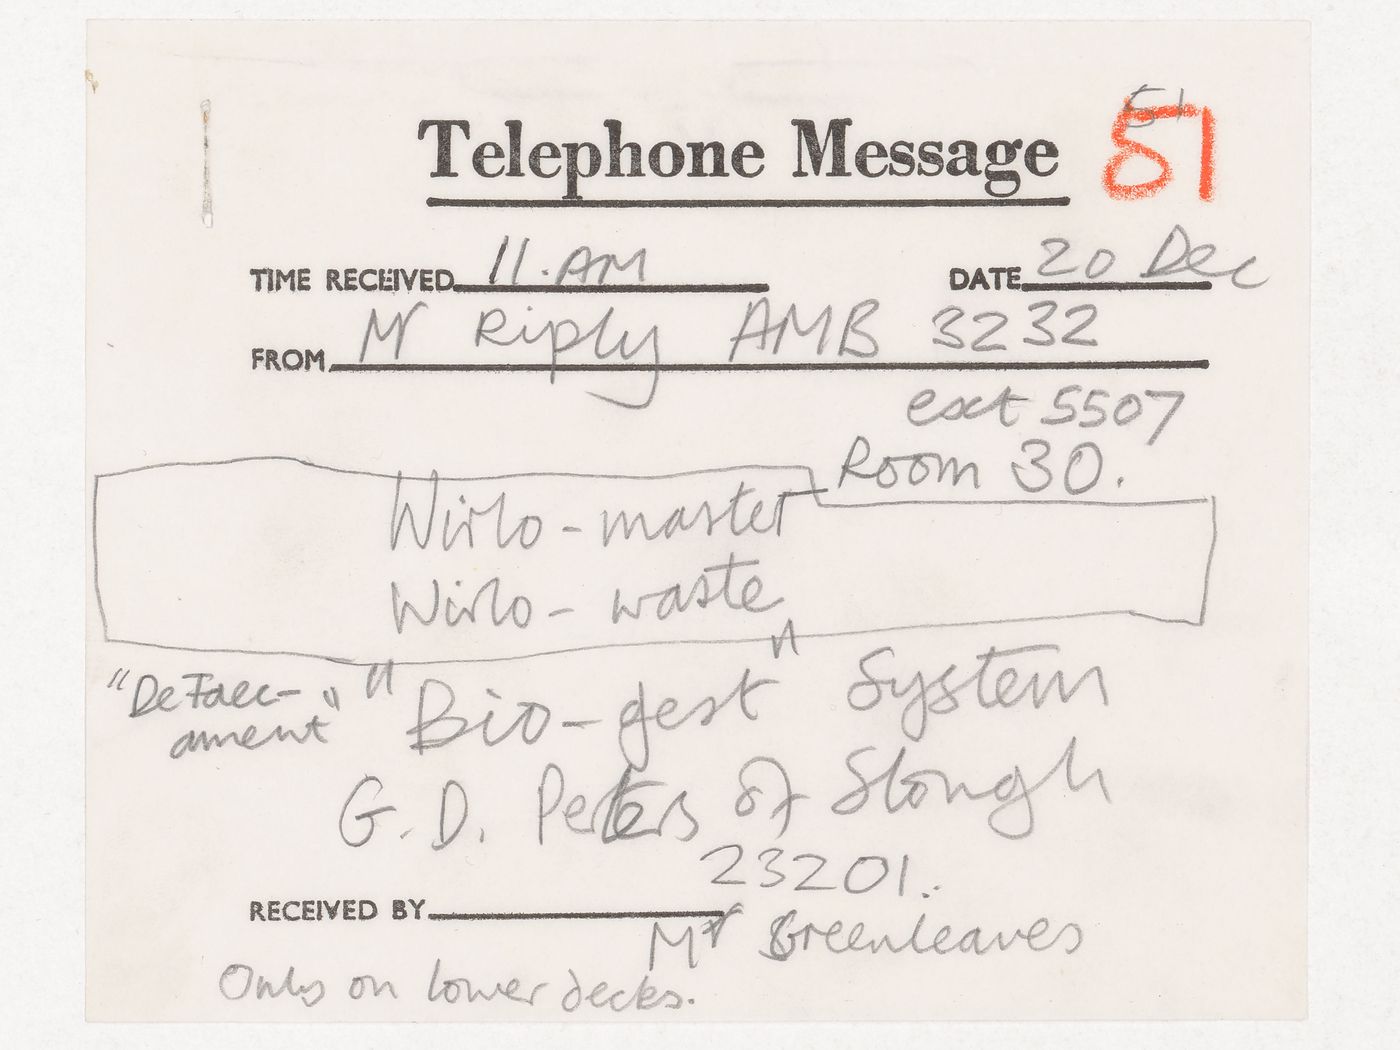 Telephone message from Mr. Riply possibly to Cedric Price